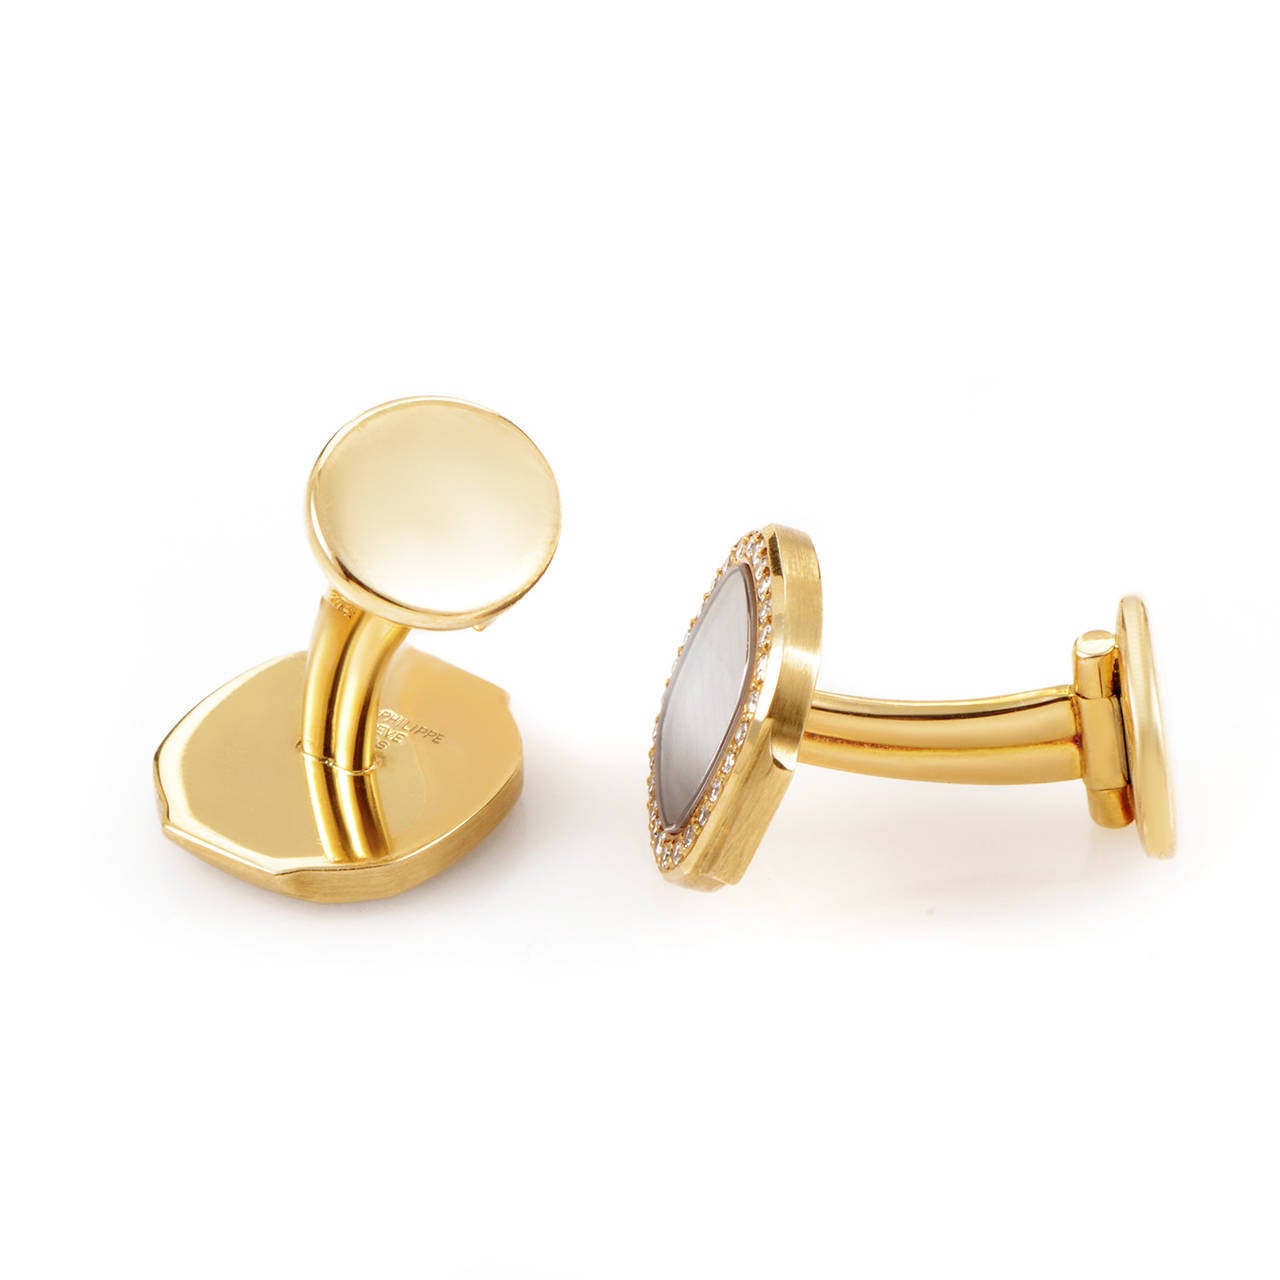 This refined pair of cufflinks from Patek Philippe's Nautilus collection have a tasteful look perfect for a sophisticated gent or lady. The cufflinks are made of 18K yellow gold and boast the Nautilus design as well as the inclusion of diamonds for